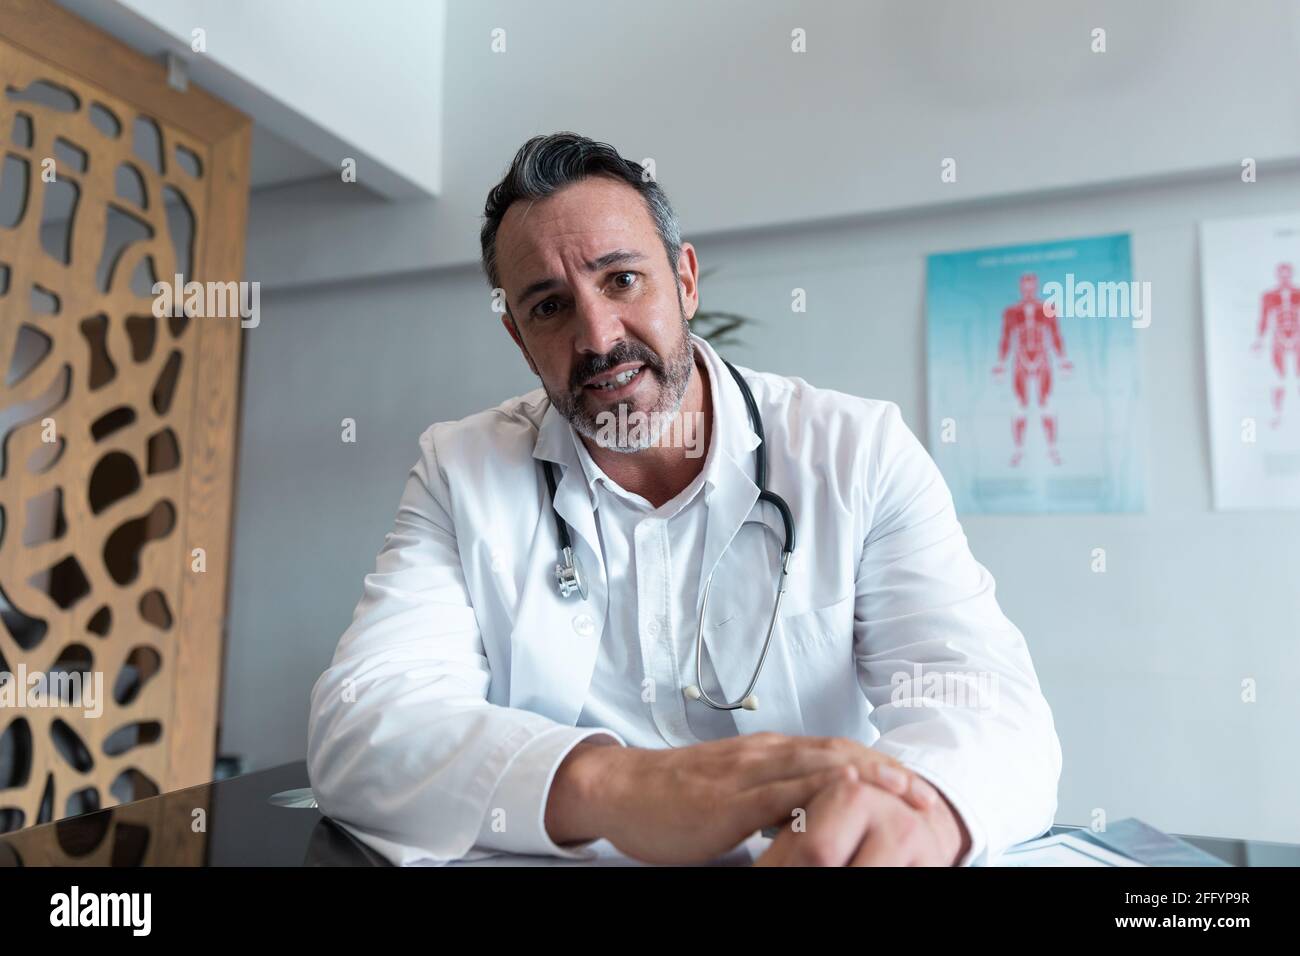 Mixed race male doctor at desk talking and gesturing during video call consultation Stock Photo